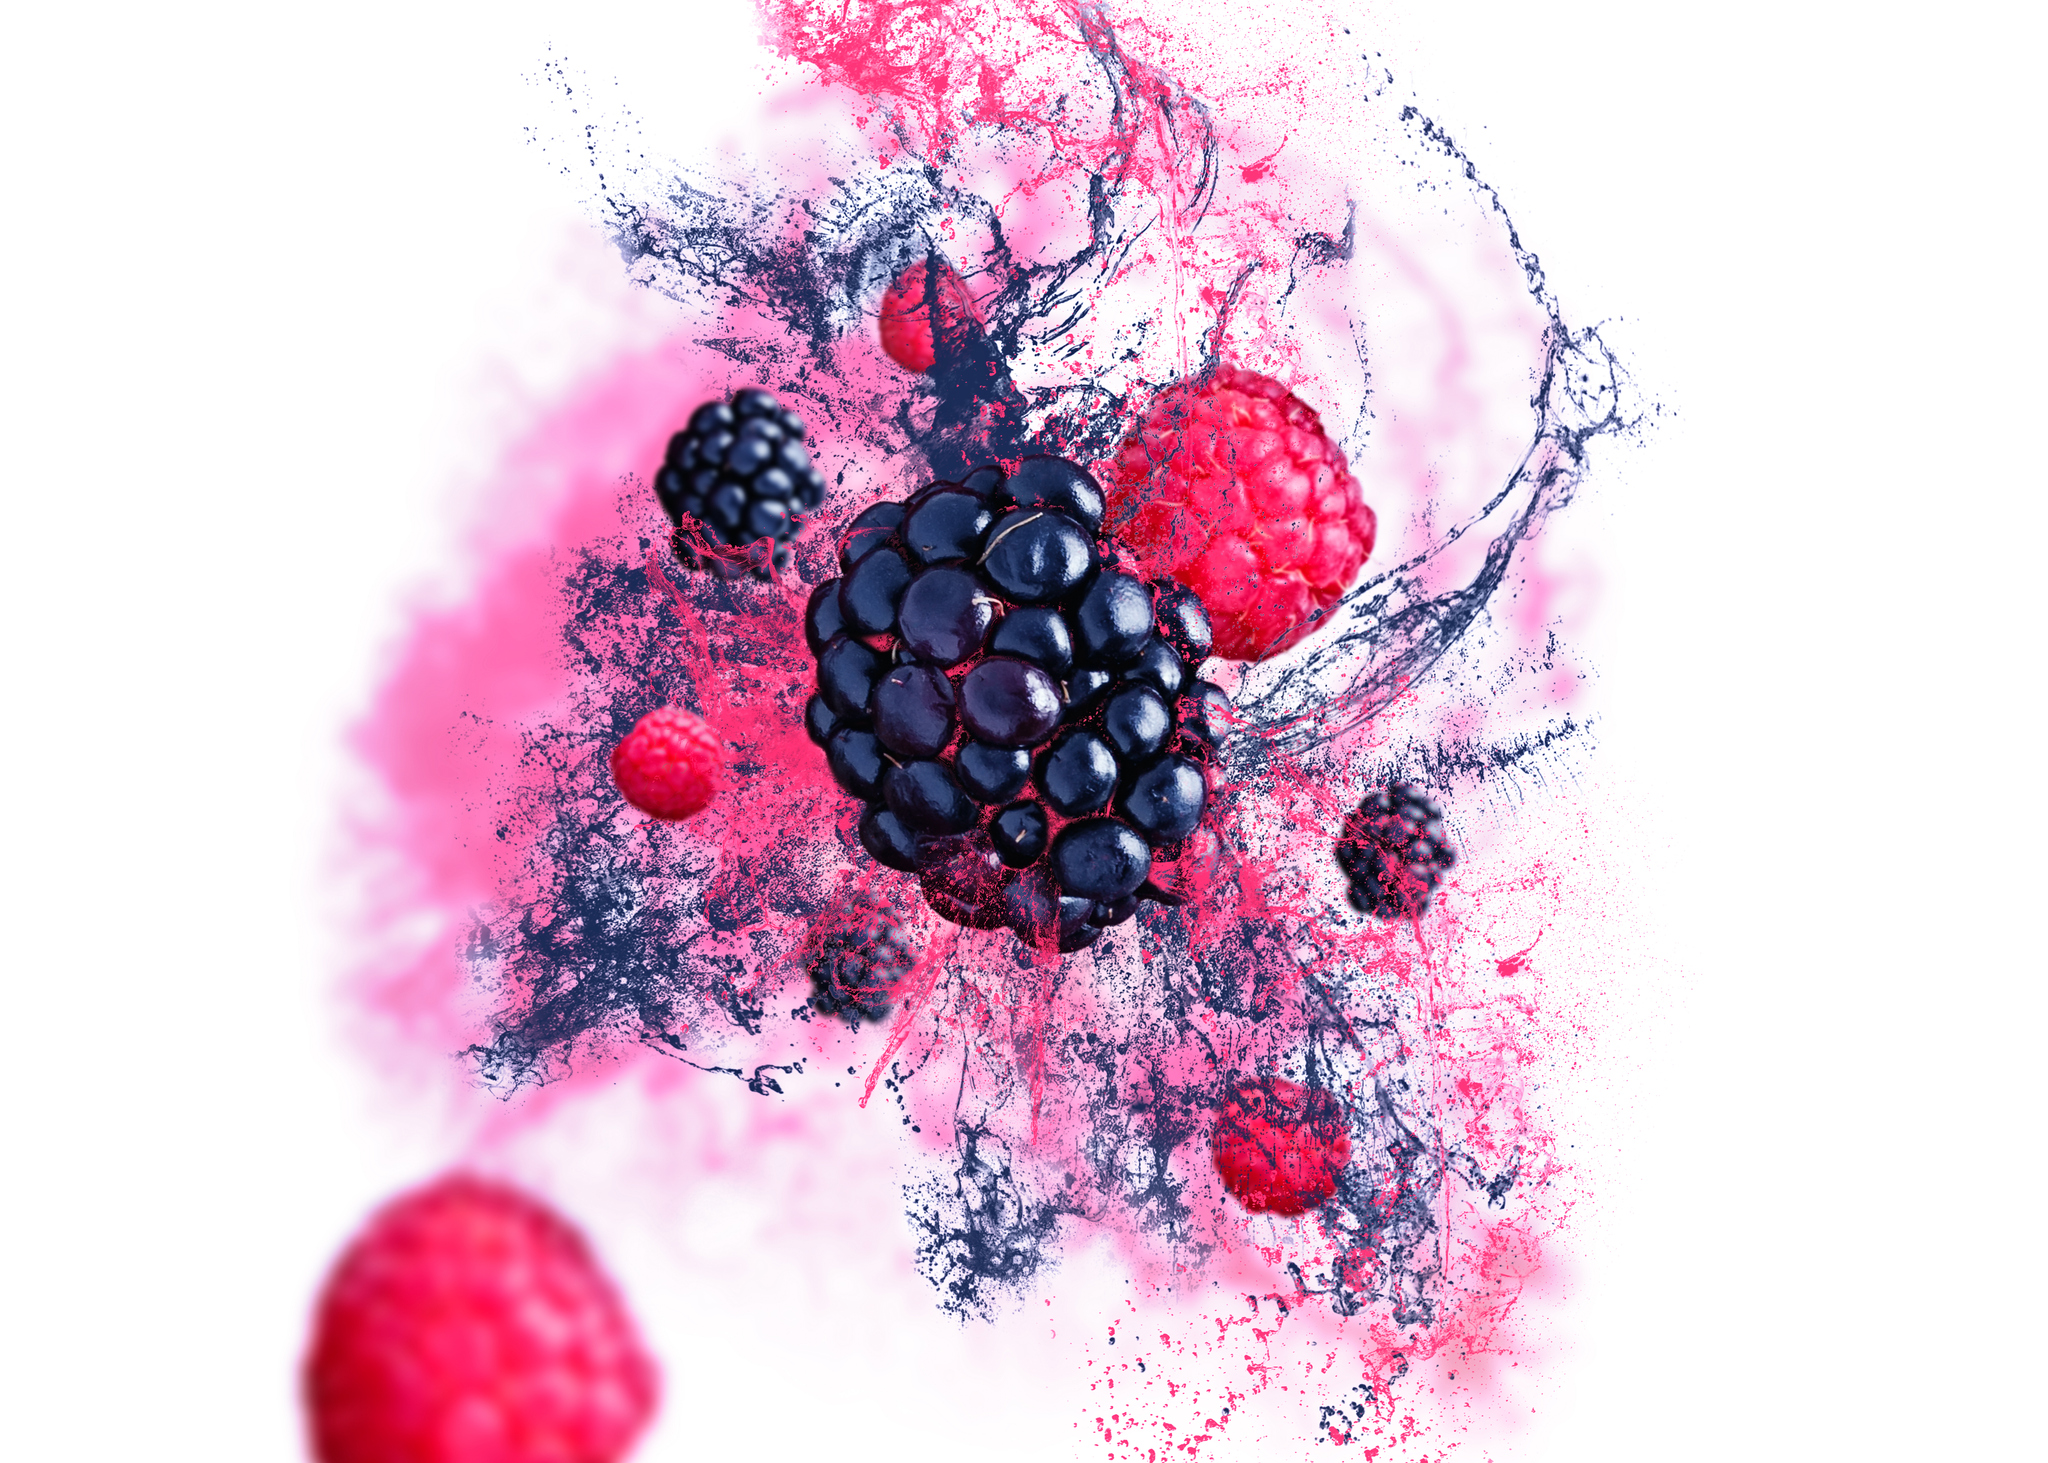 Raspberries and blackberries falling from the air on white background with fruit juice.